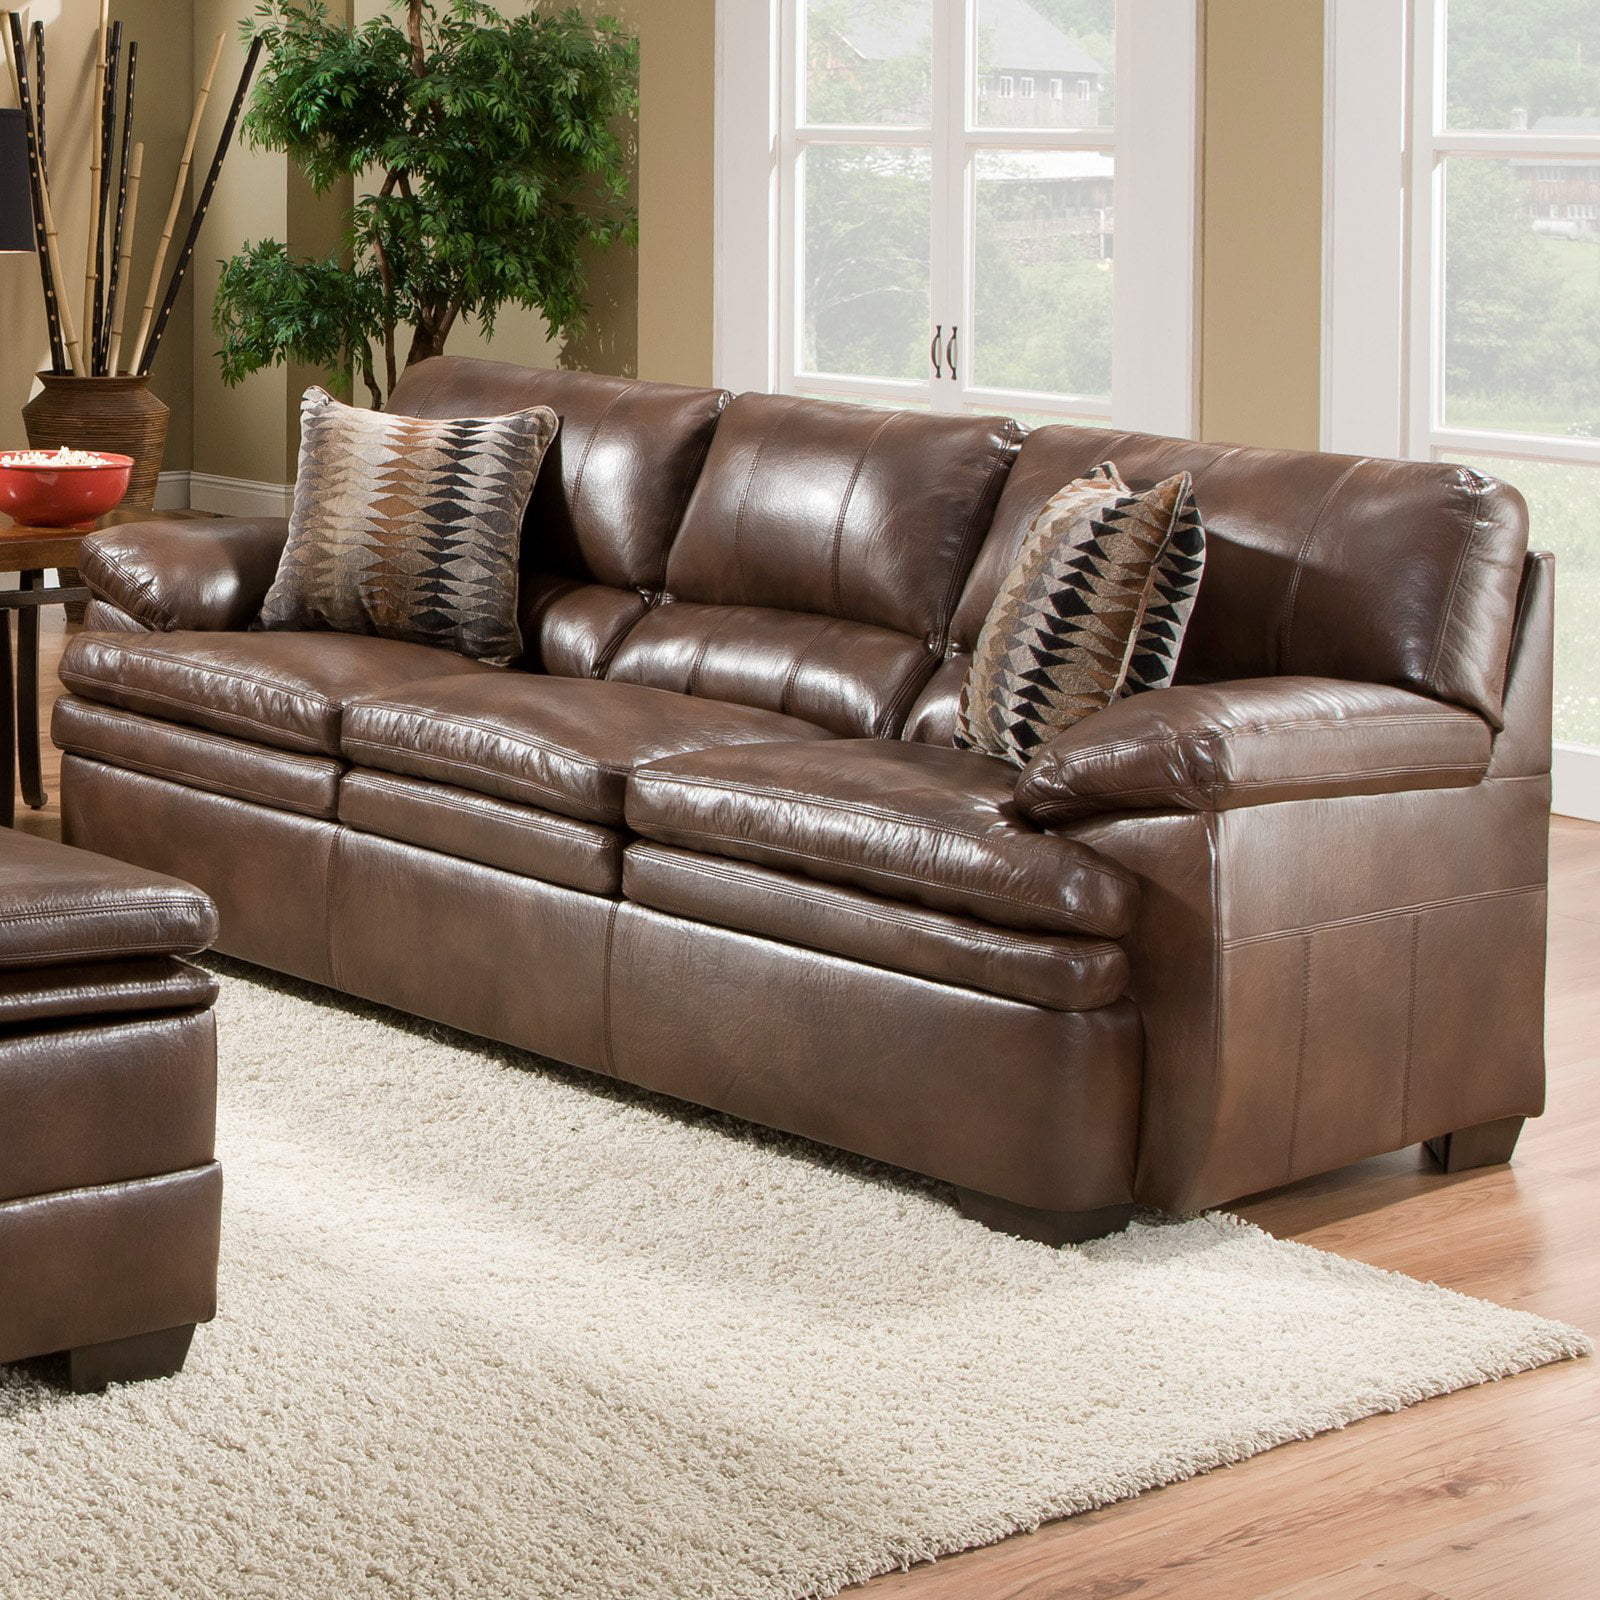 Bonded Leather Sofa Brown, Simmons Leather Sofa And Loveseat